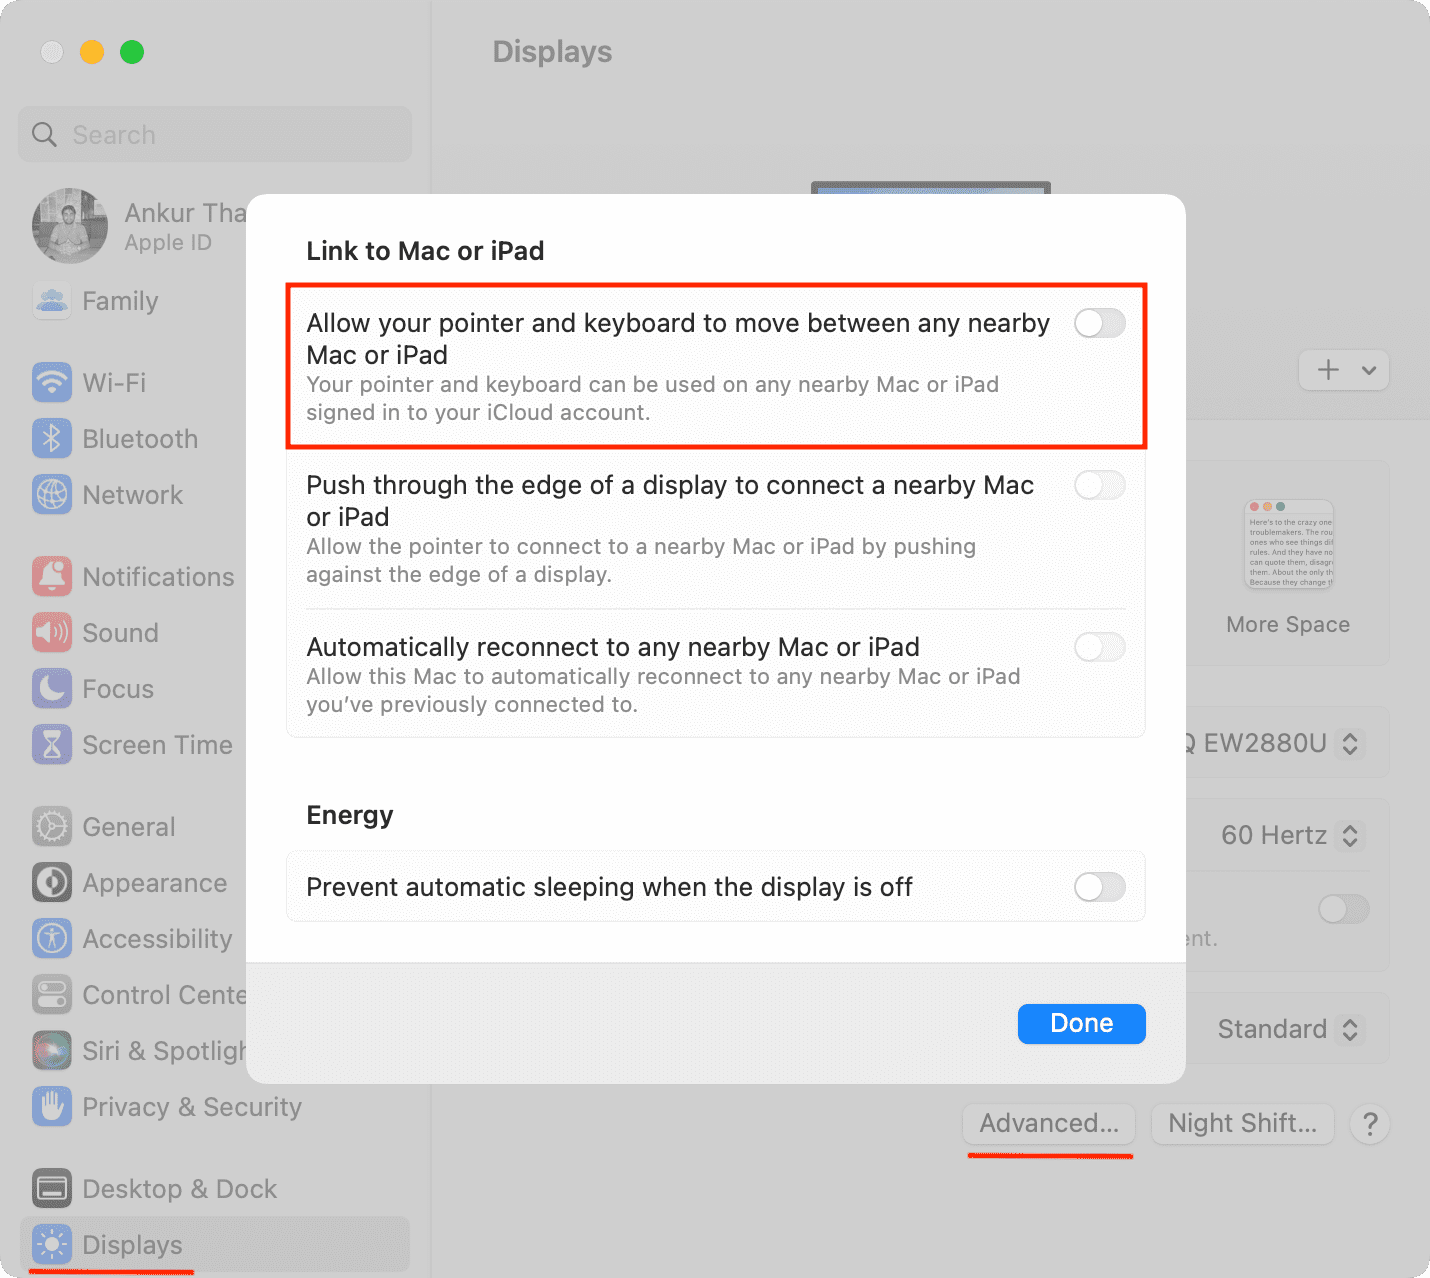 Allow your pointer and keyboard to move between any nearby Mac or iPad in Mac settings